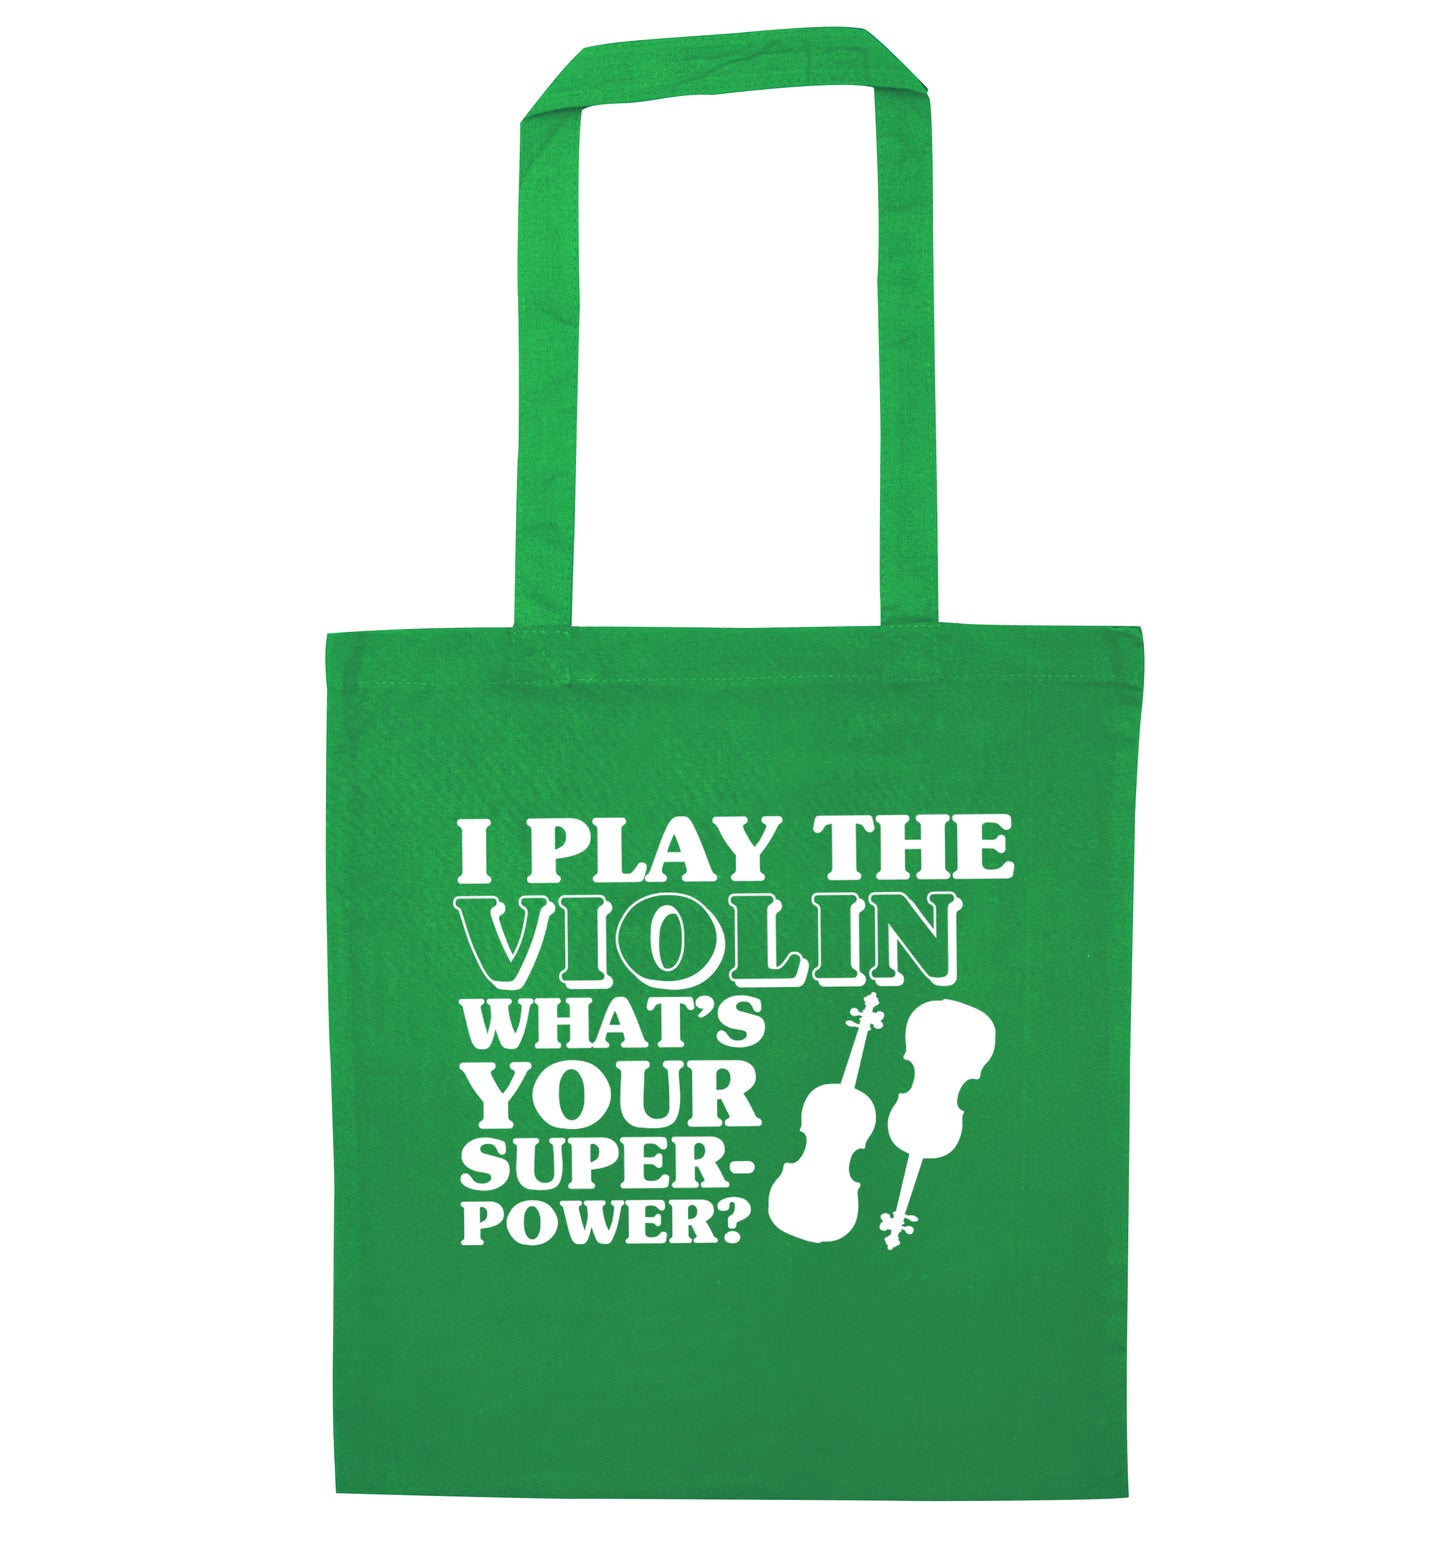 I Play Violin What's Your Superpower? green tote bag